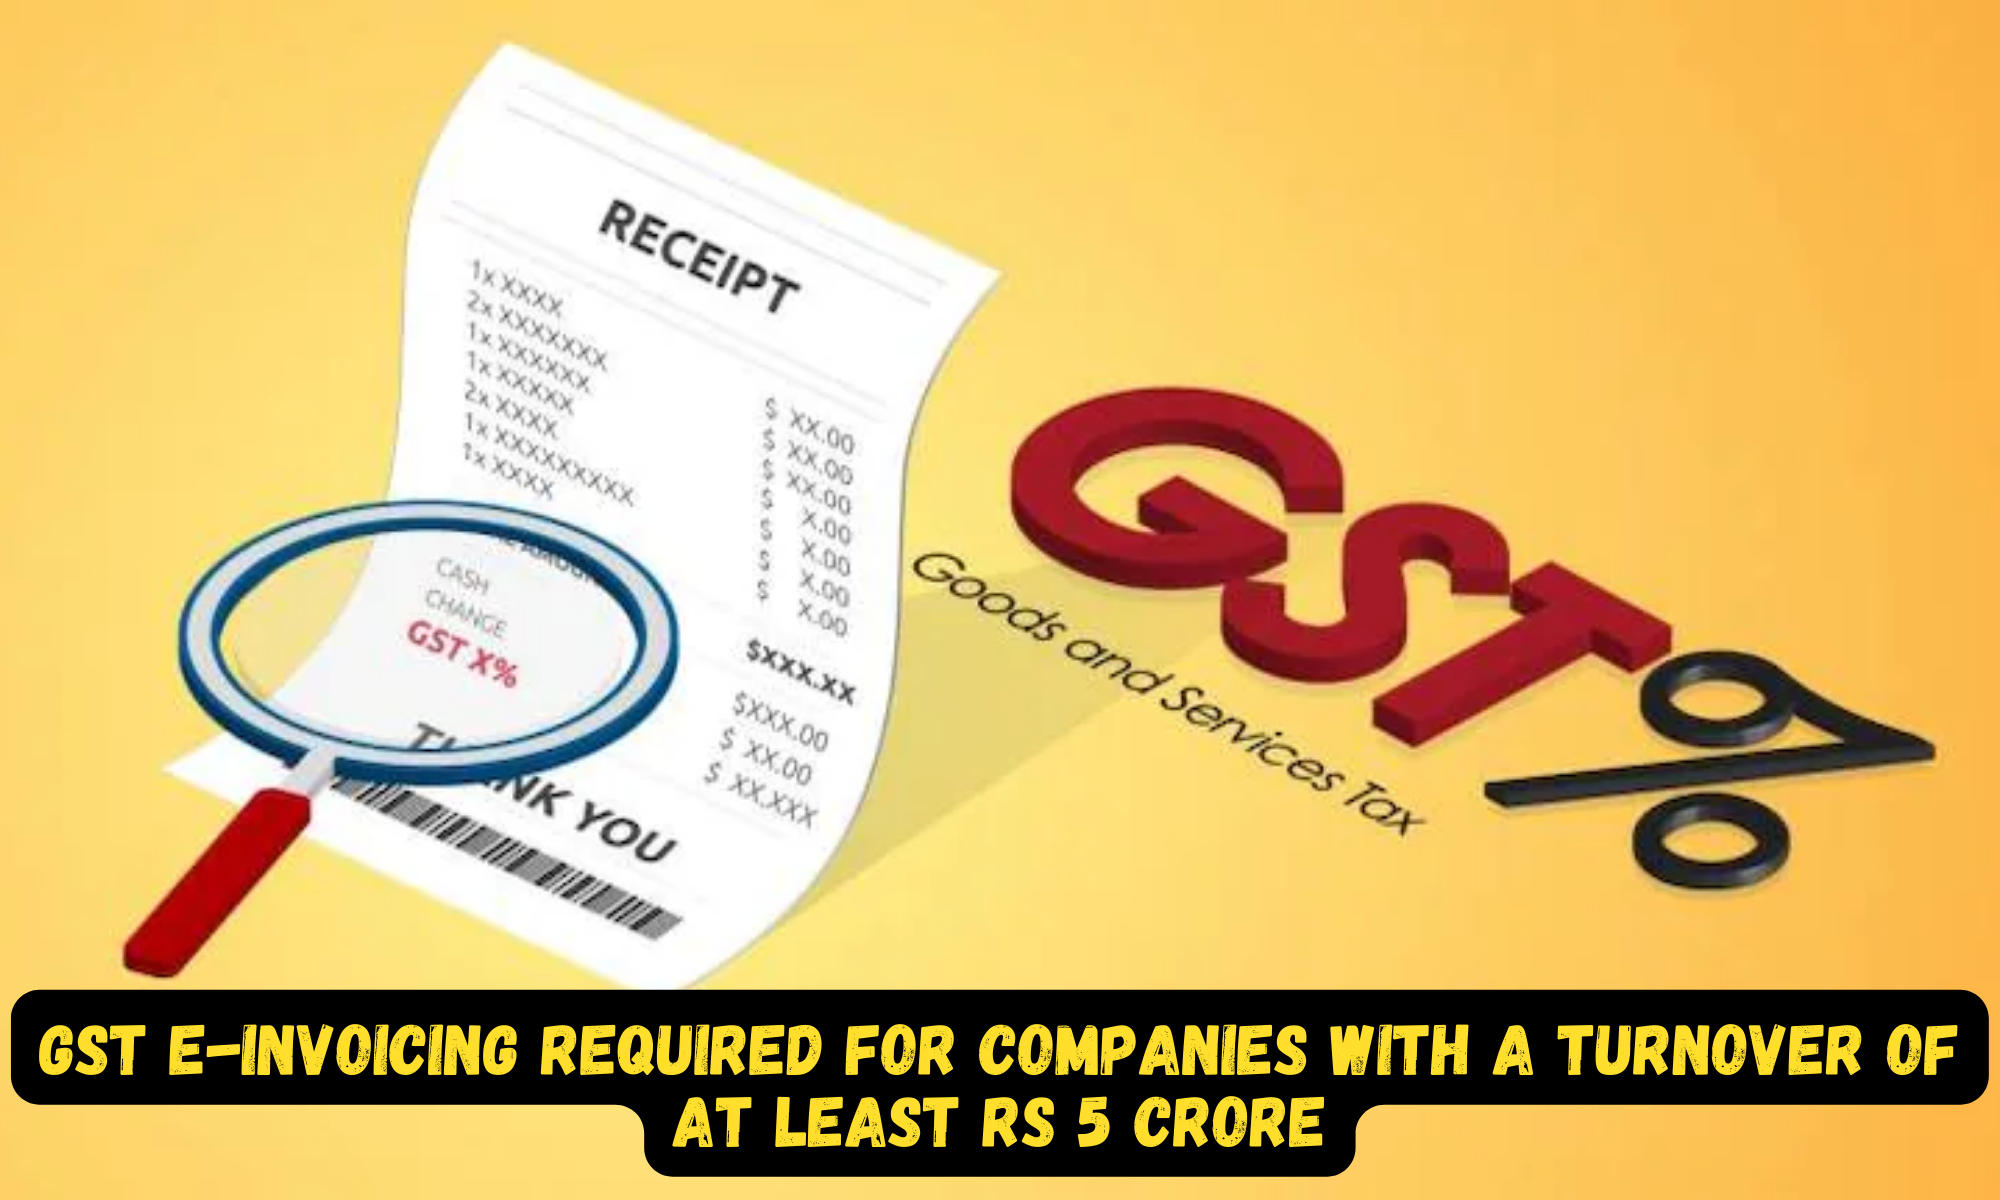 GST e-invoicing required for companies with a turnover of at least Rs 5 crore